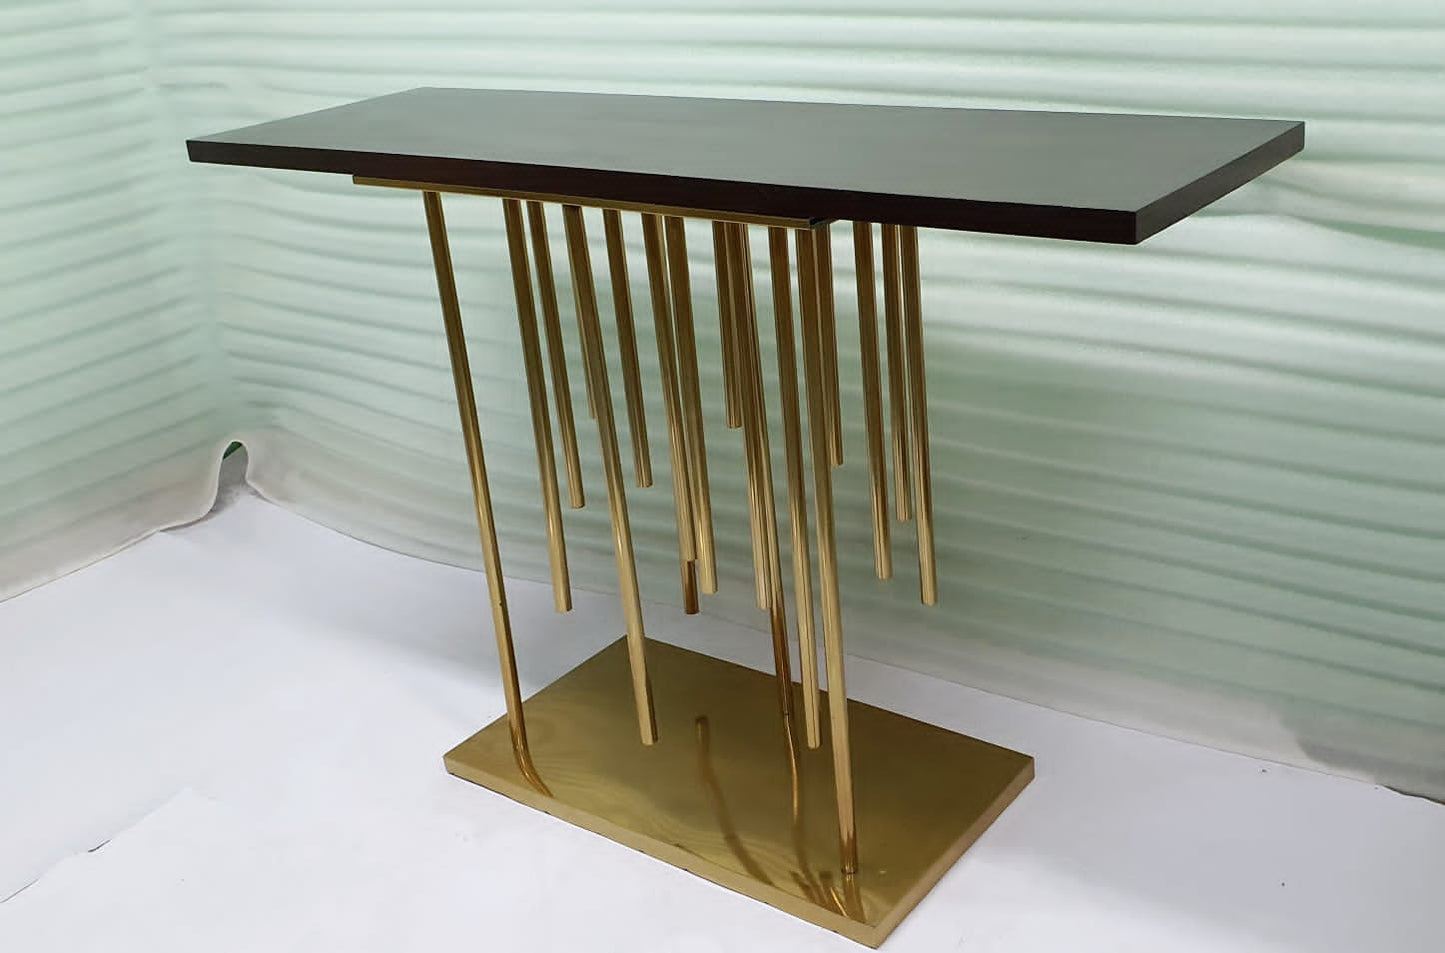 Metal Tall Console Table with Wooden Top, Gold and Brown